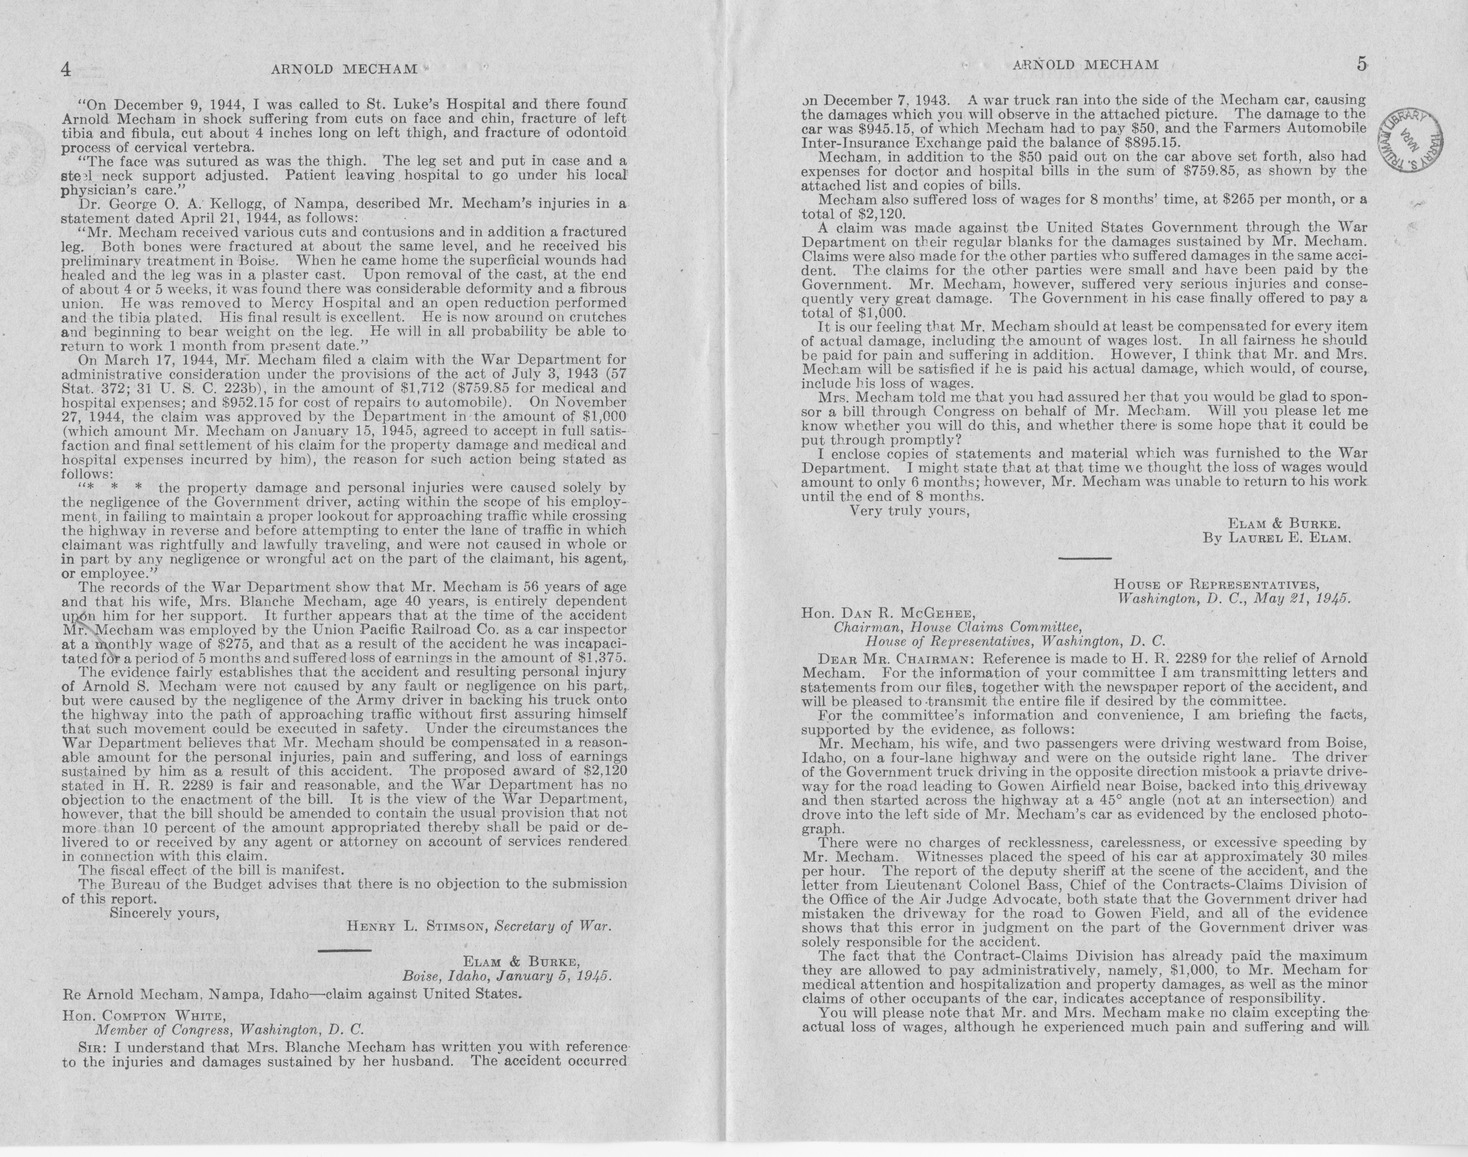 Memorandum from Frederick J. Bailey to M. C. Latta, H. R. 2289, For the Relief of Arnold Mecham, with Attachments